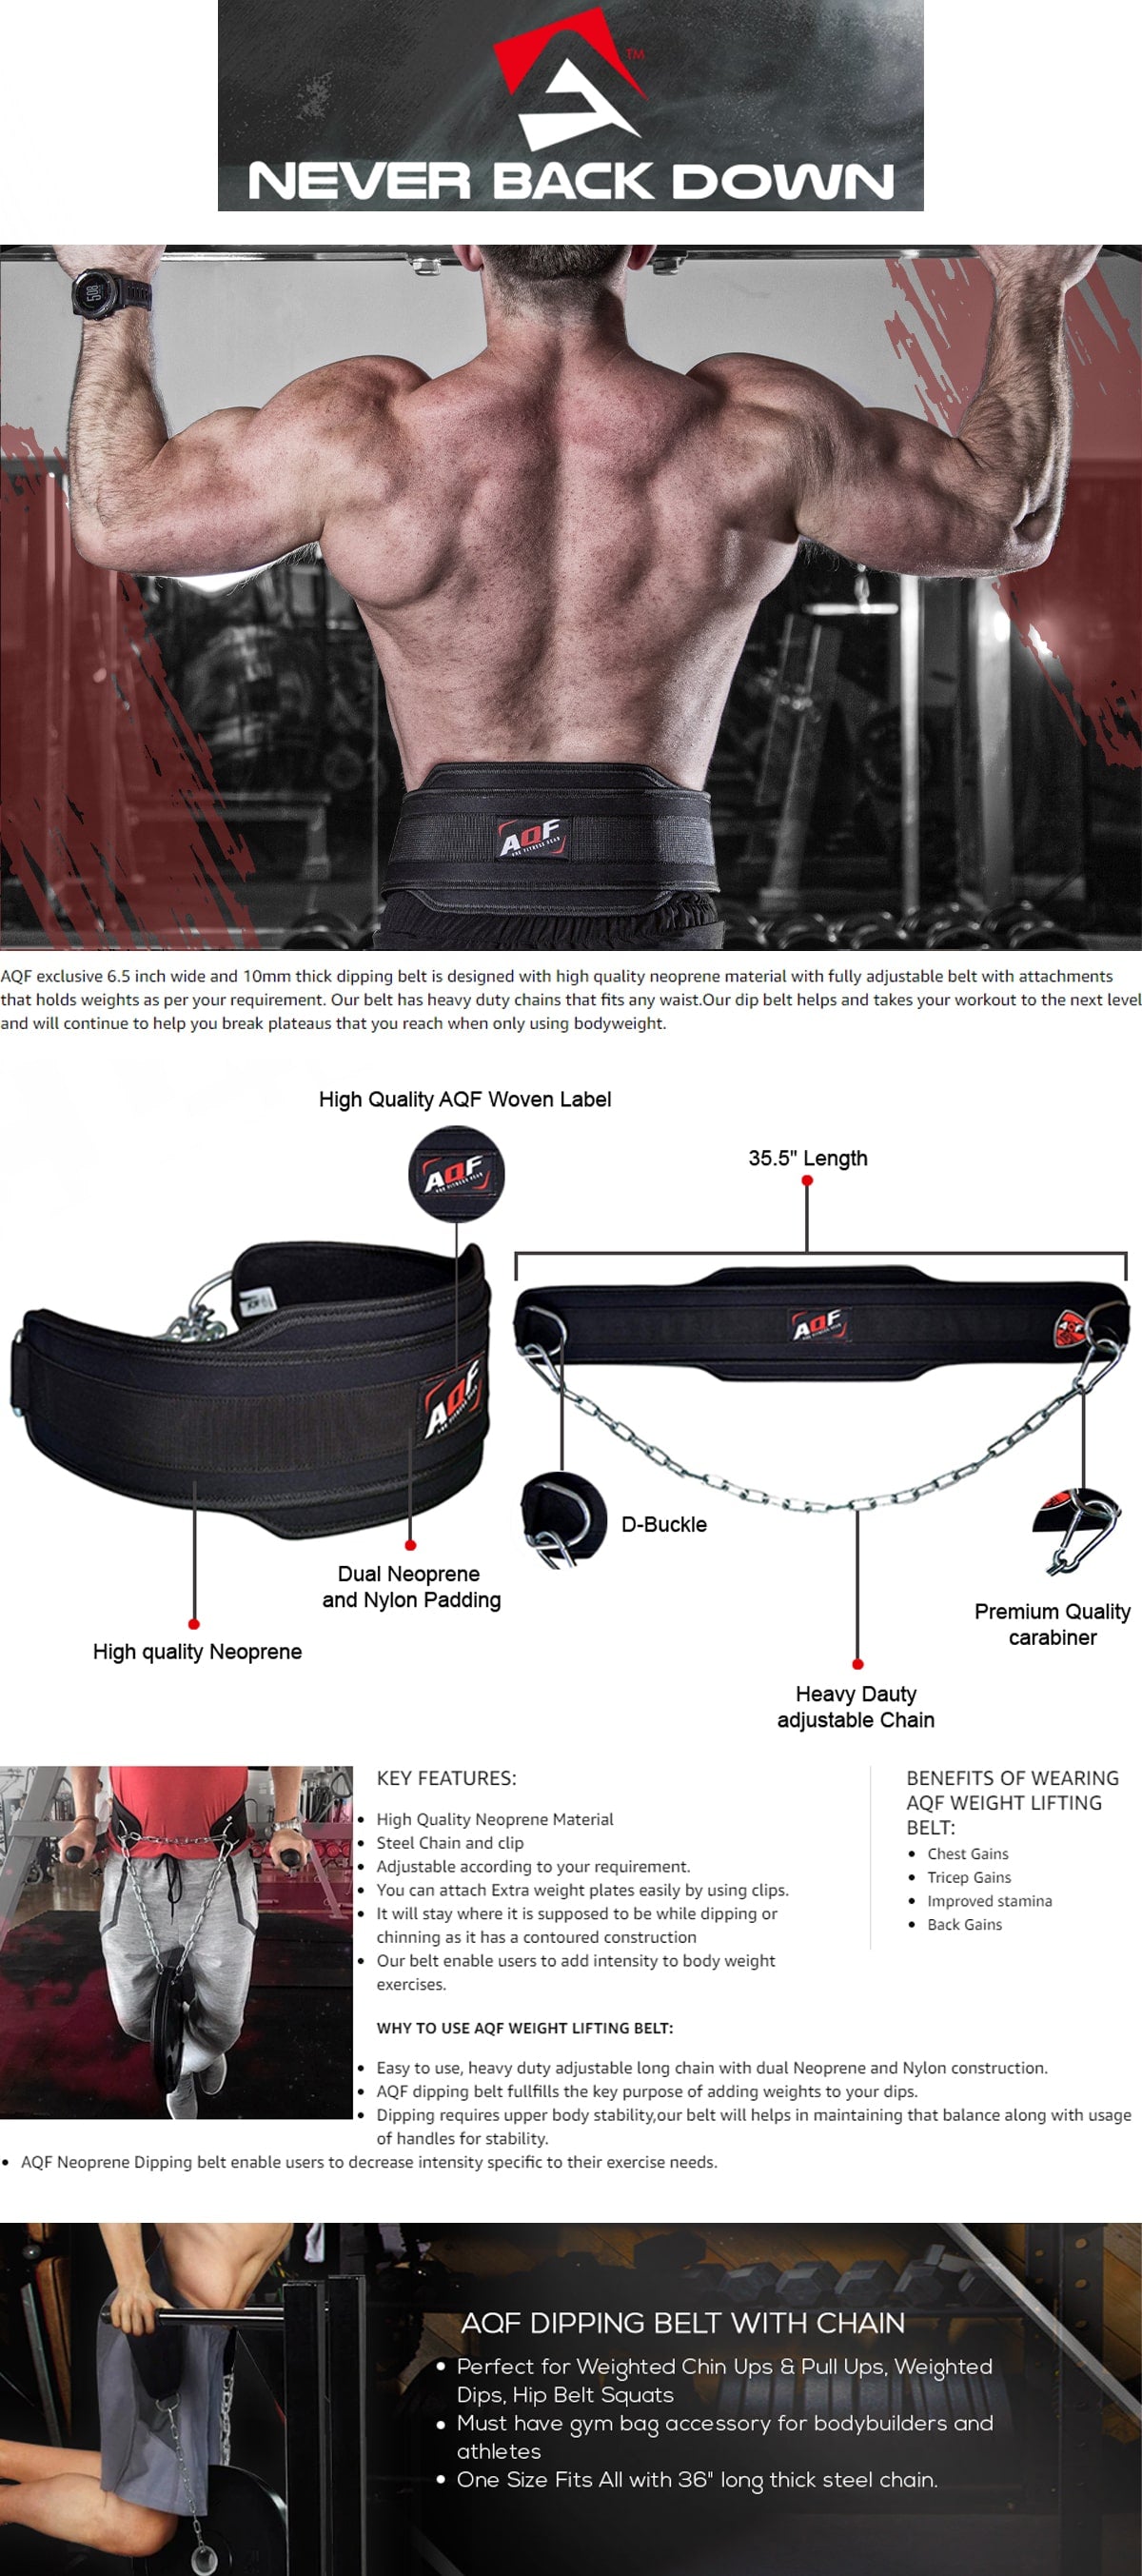 Benefits and key features of AQF Dipping Belt with Metal Chain 